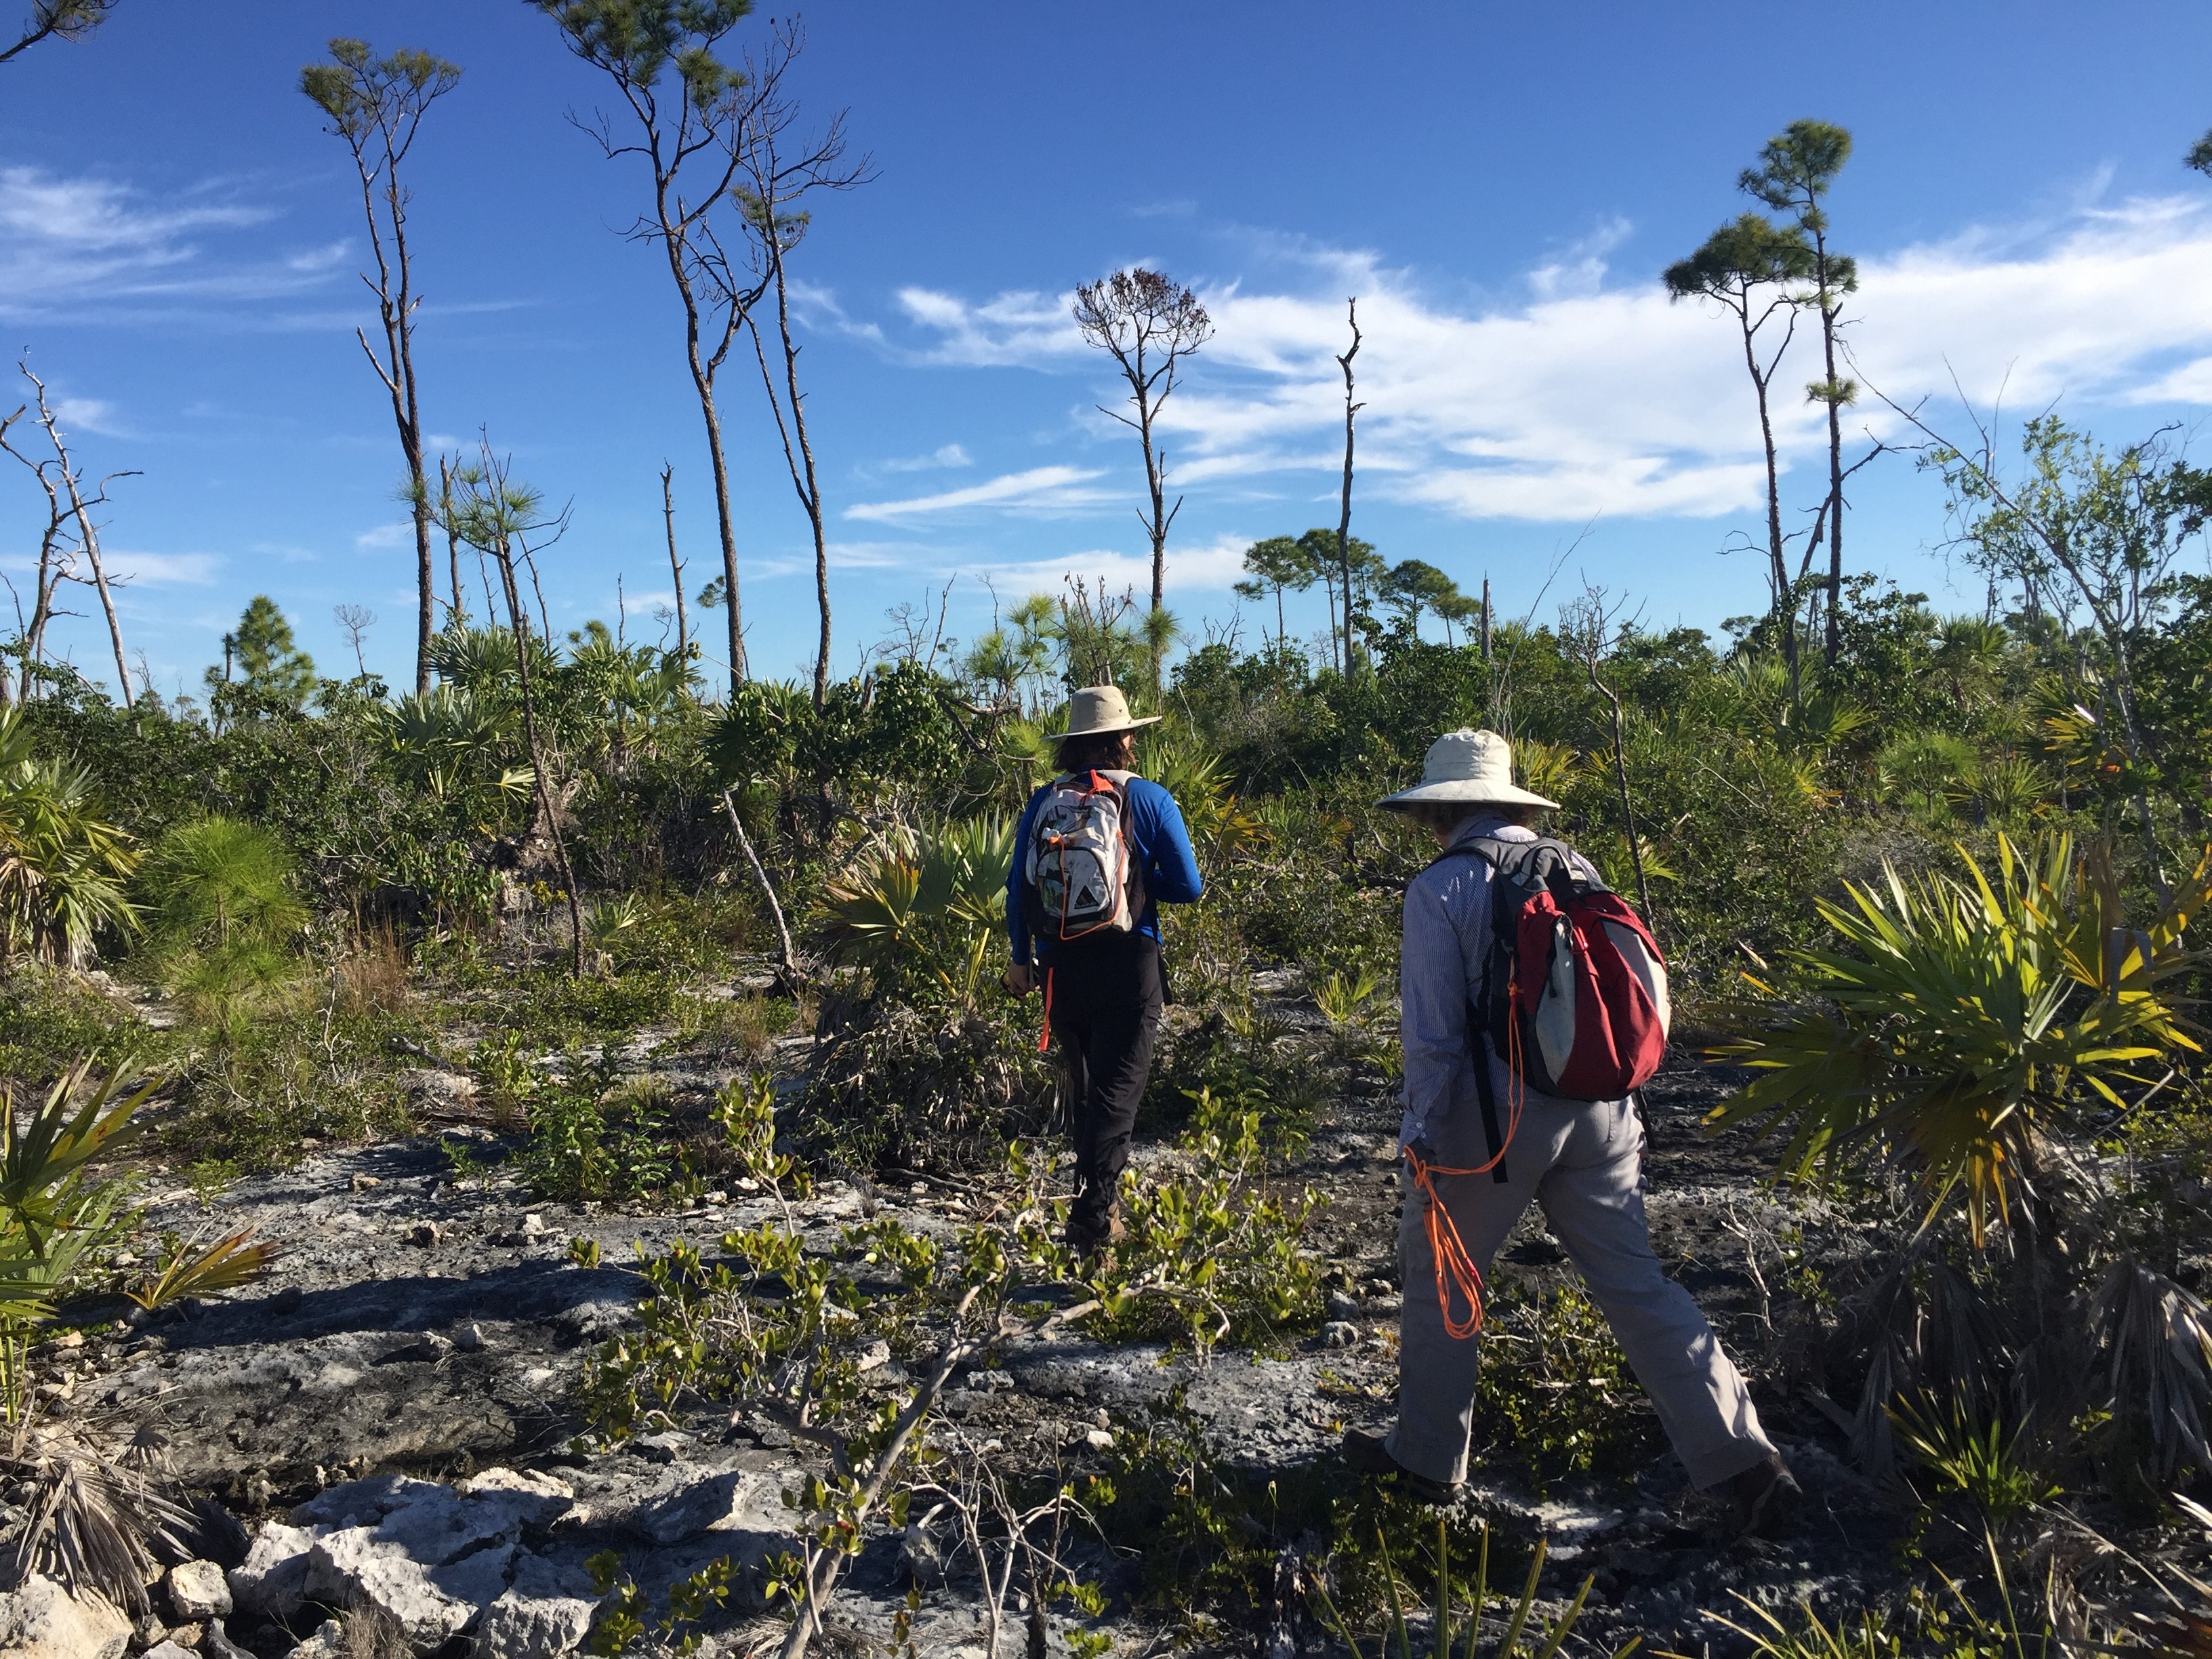 People walking through the wilds of the Florida Keys